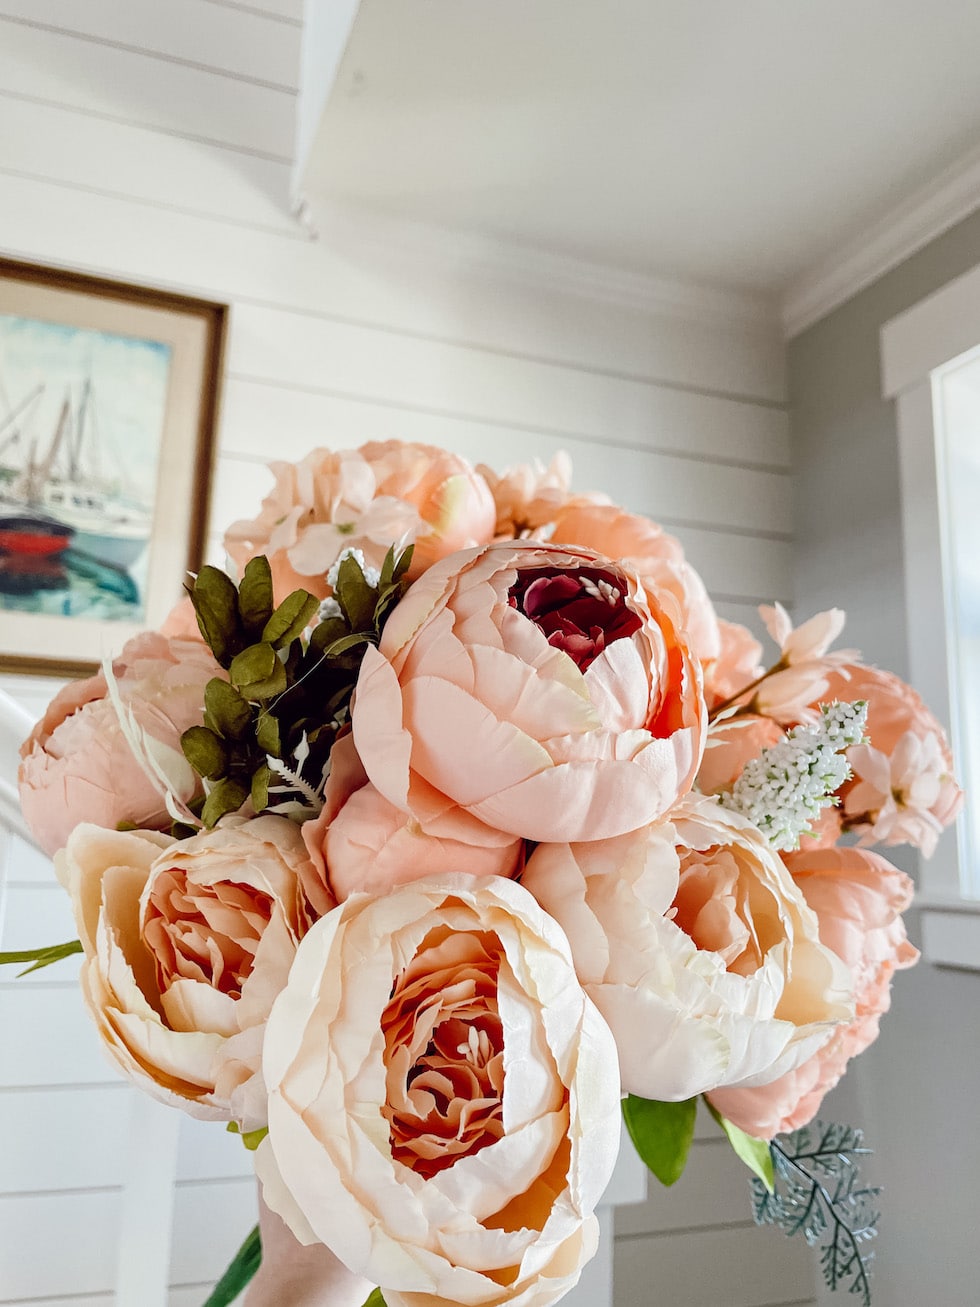 Simple & Lovely: Realistic Faux Peonies